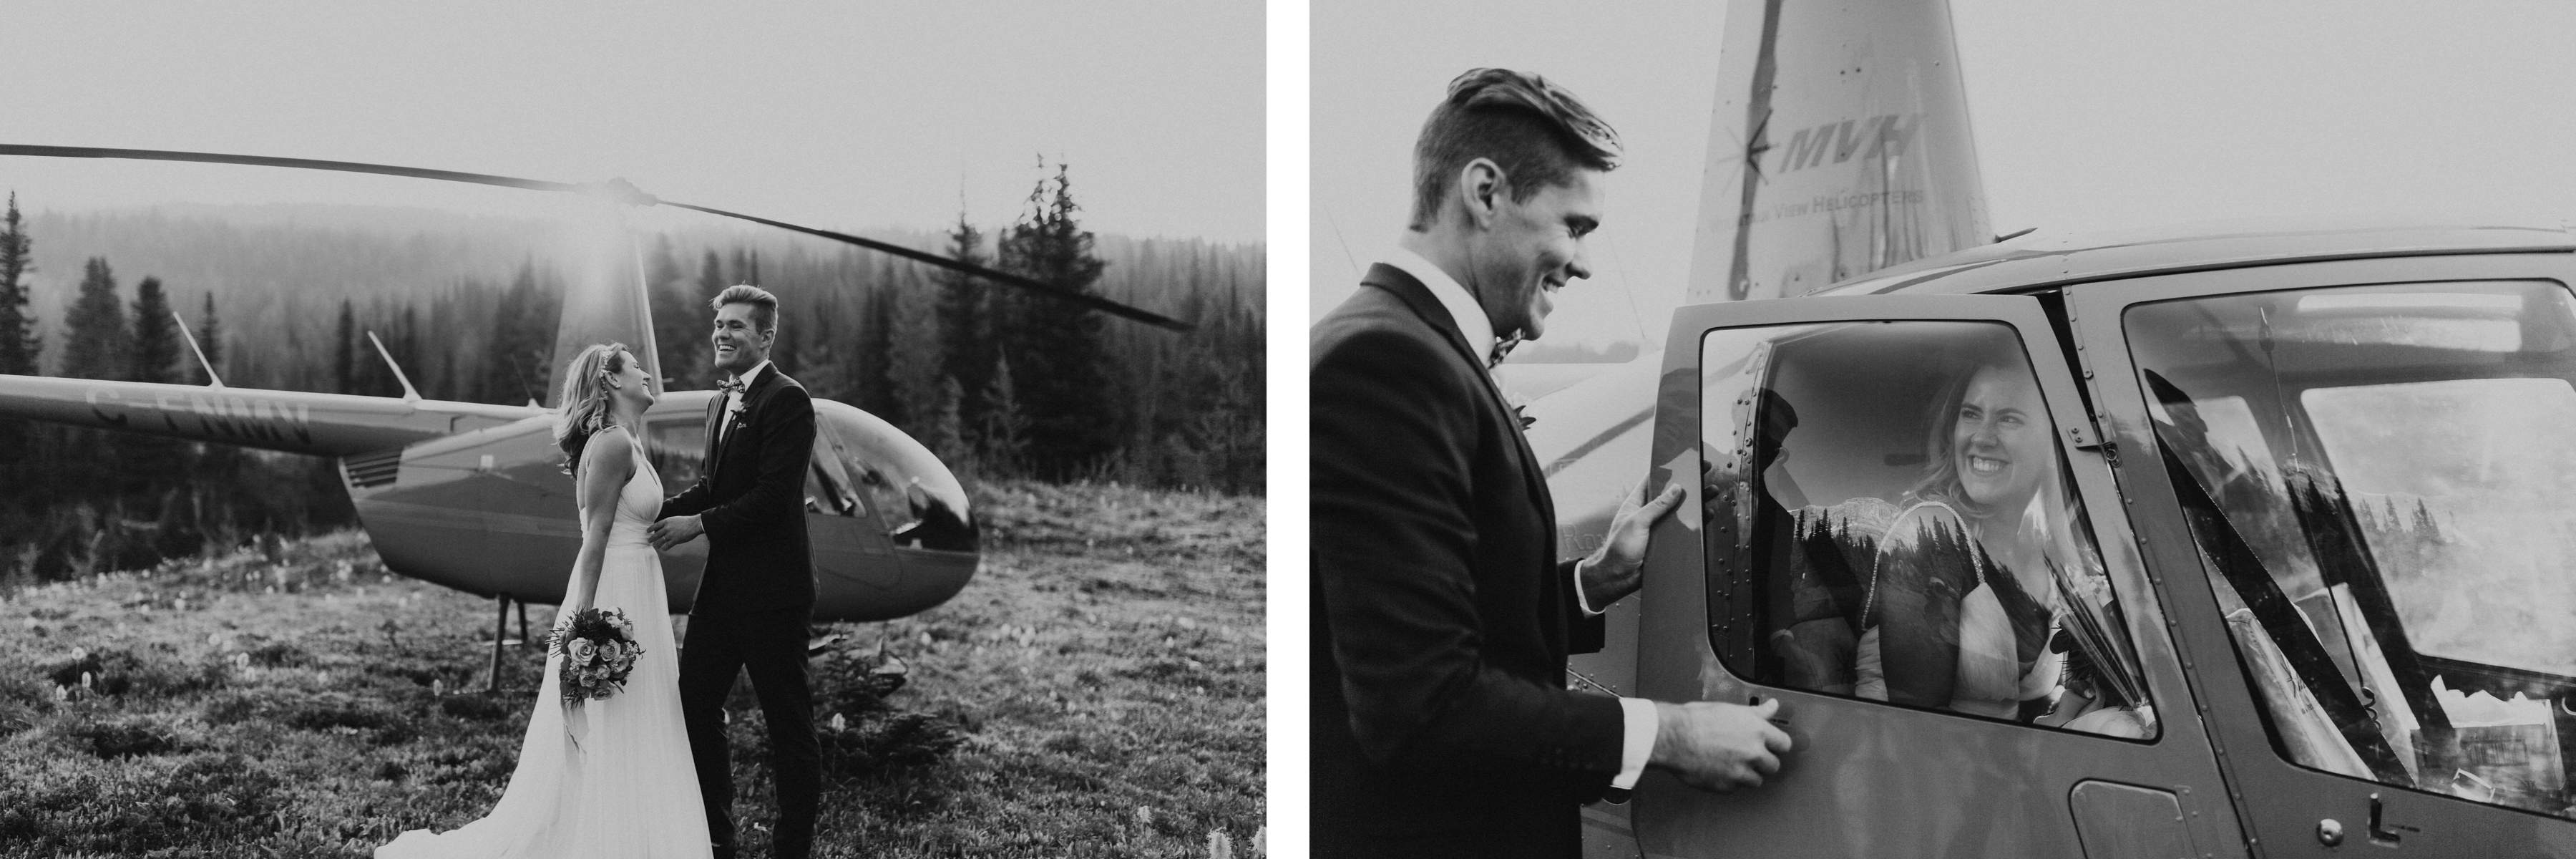 Banff Helicopter Elopement Photographers - Image 29